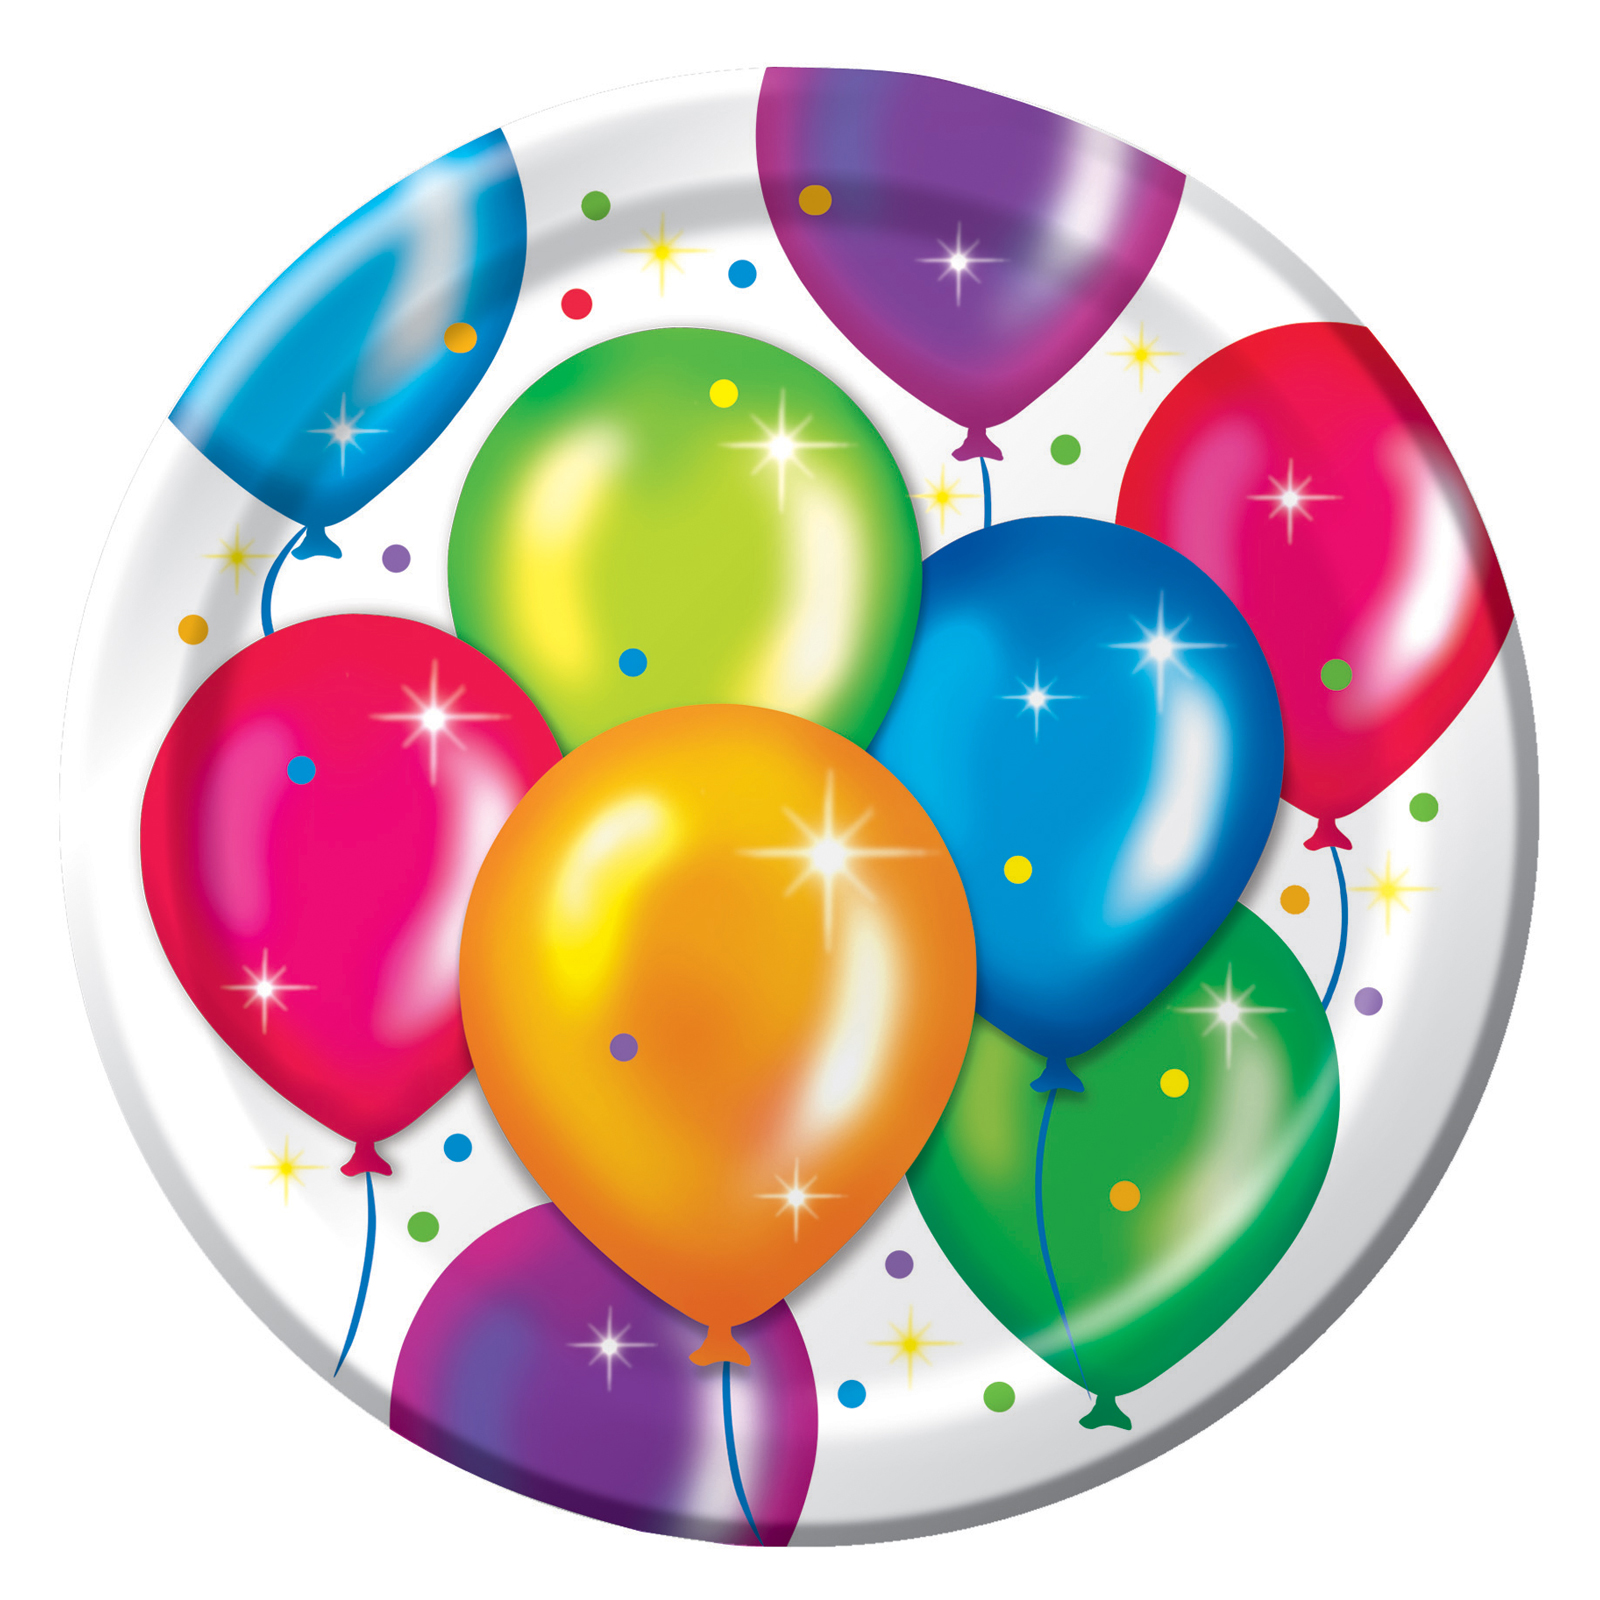 free-birthday-balloon-images-download-free-birthday-balloon-images-png